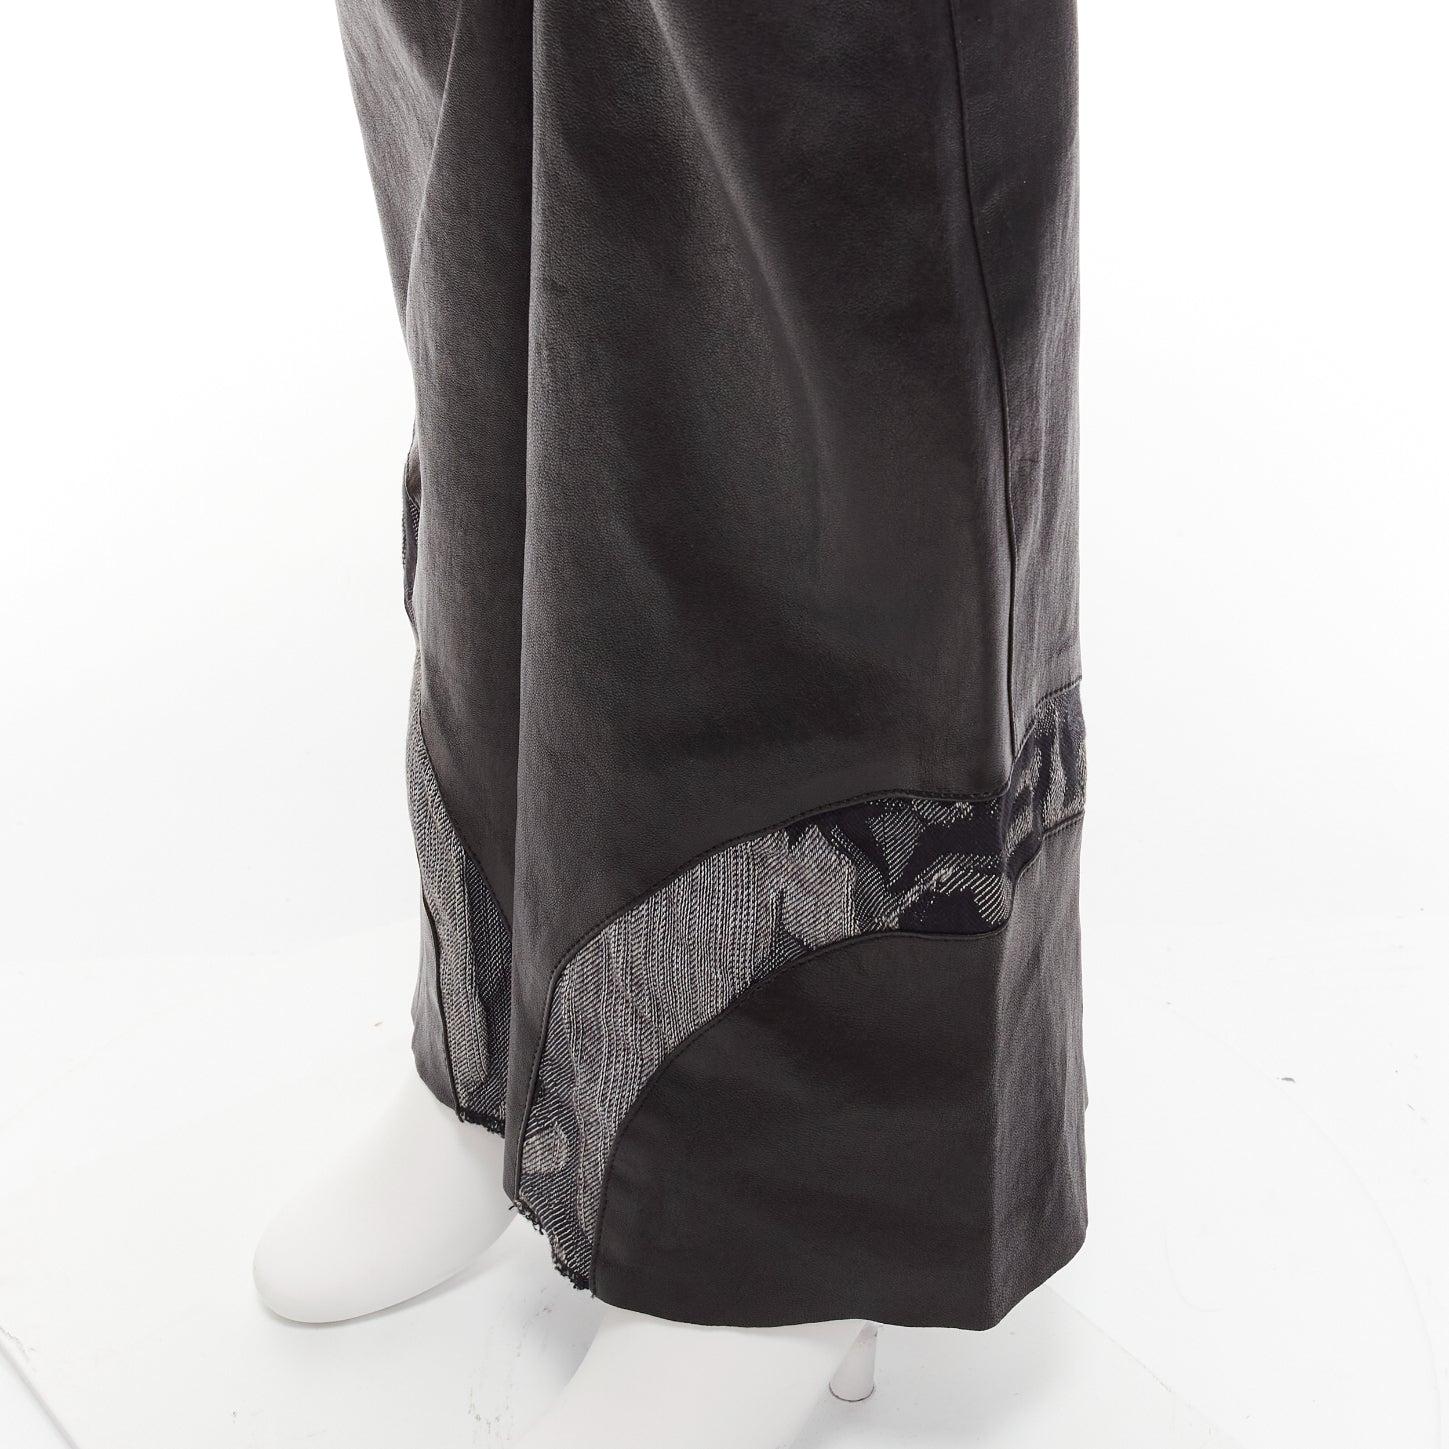 JITROIS black leather cotton blend lace panels wide leg flared pants IT34 XXS
Reference: AAWC/A00964
Brand: Jitrois
Material: Leather, Cotton, Blend
Color: Black, Grey
Pattern: Lace
Closure: Zip Fly
Extra Details: Lace jacquard cotton panels at knee